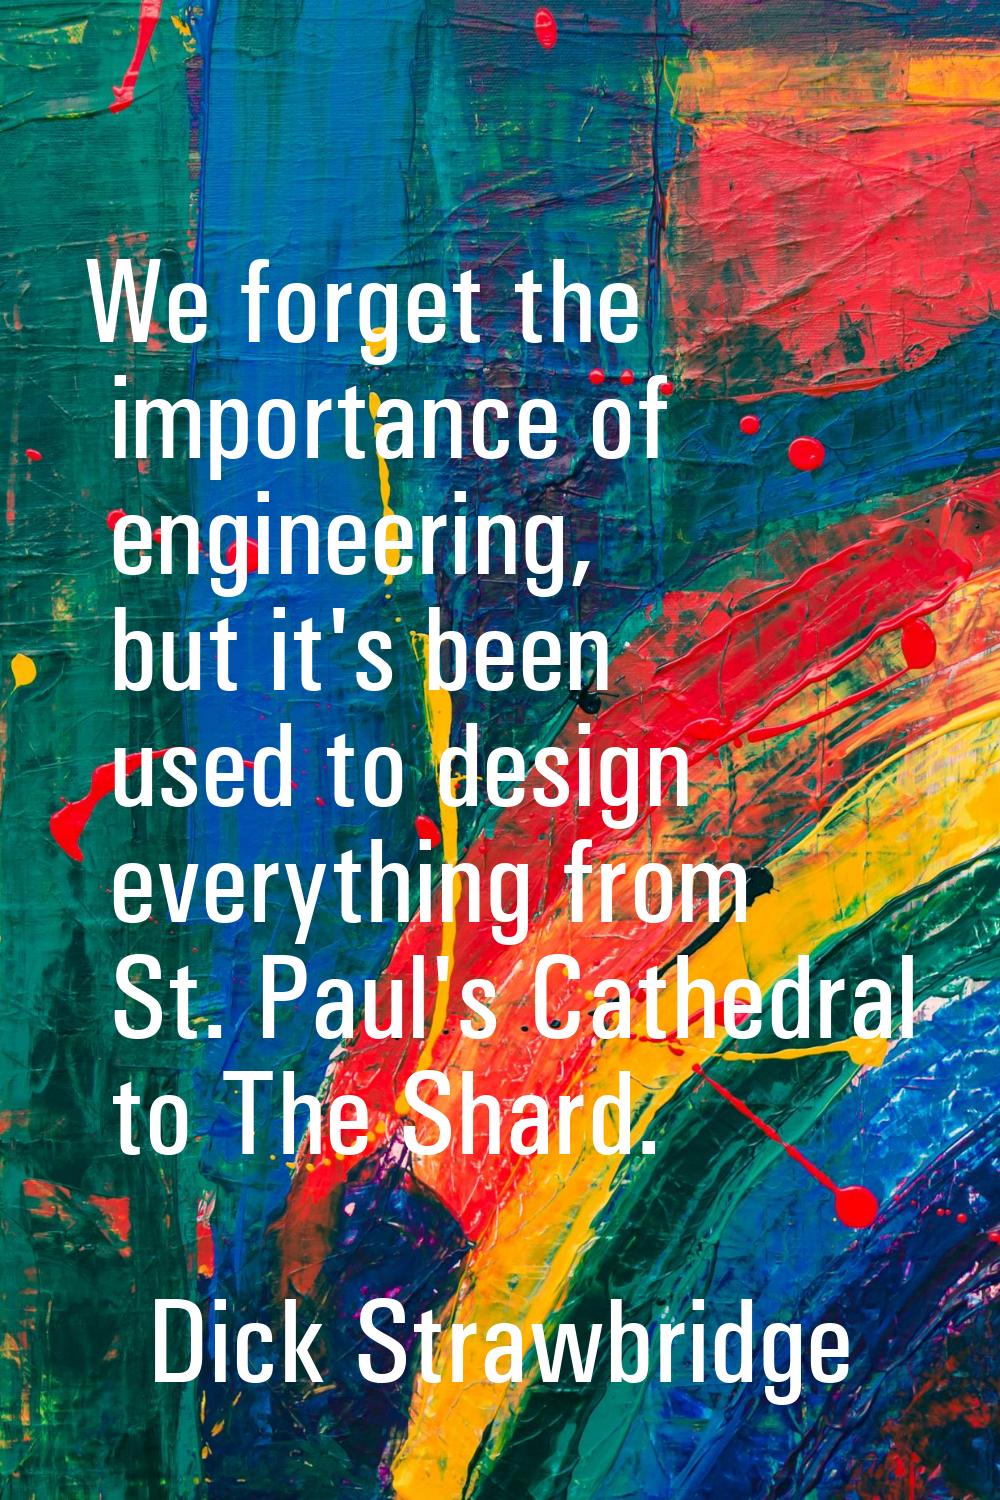 We forget the importance of engineering, but it's been used to design everything from St. Paul's Ca